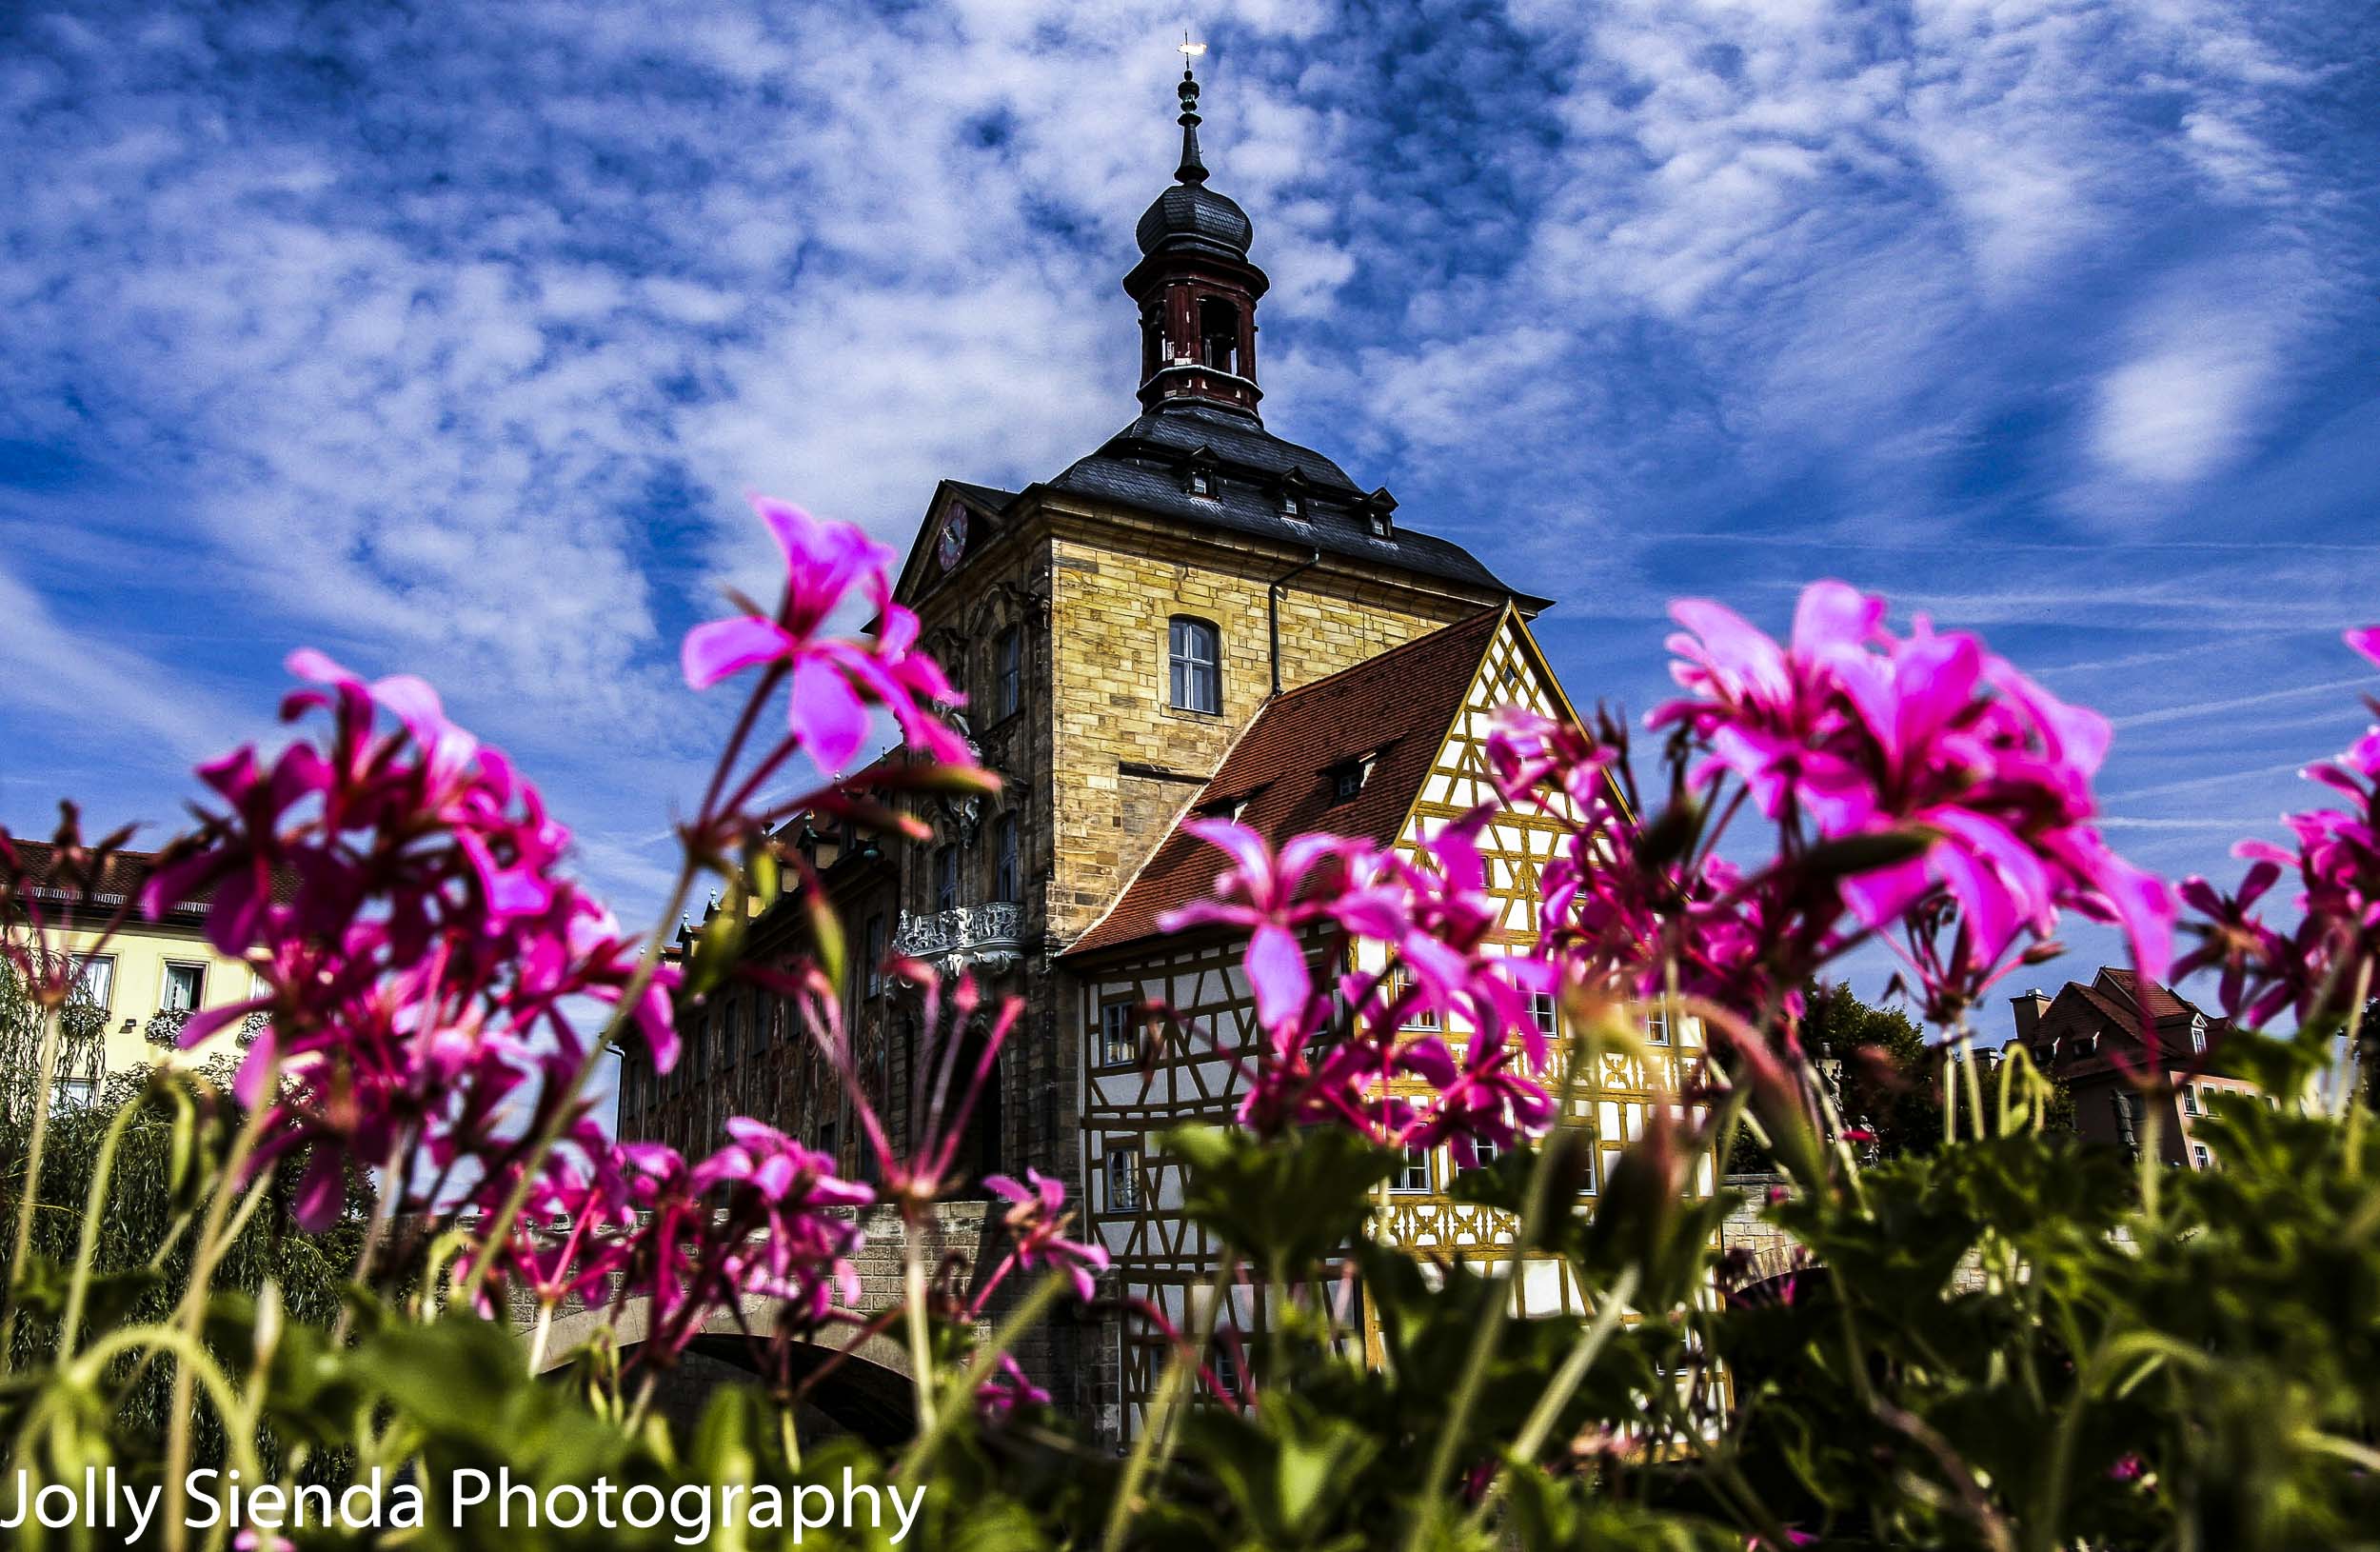 Bamberg's City Hall, Altes Rathaus, with pink flowers